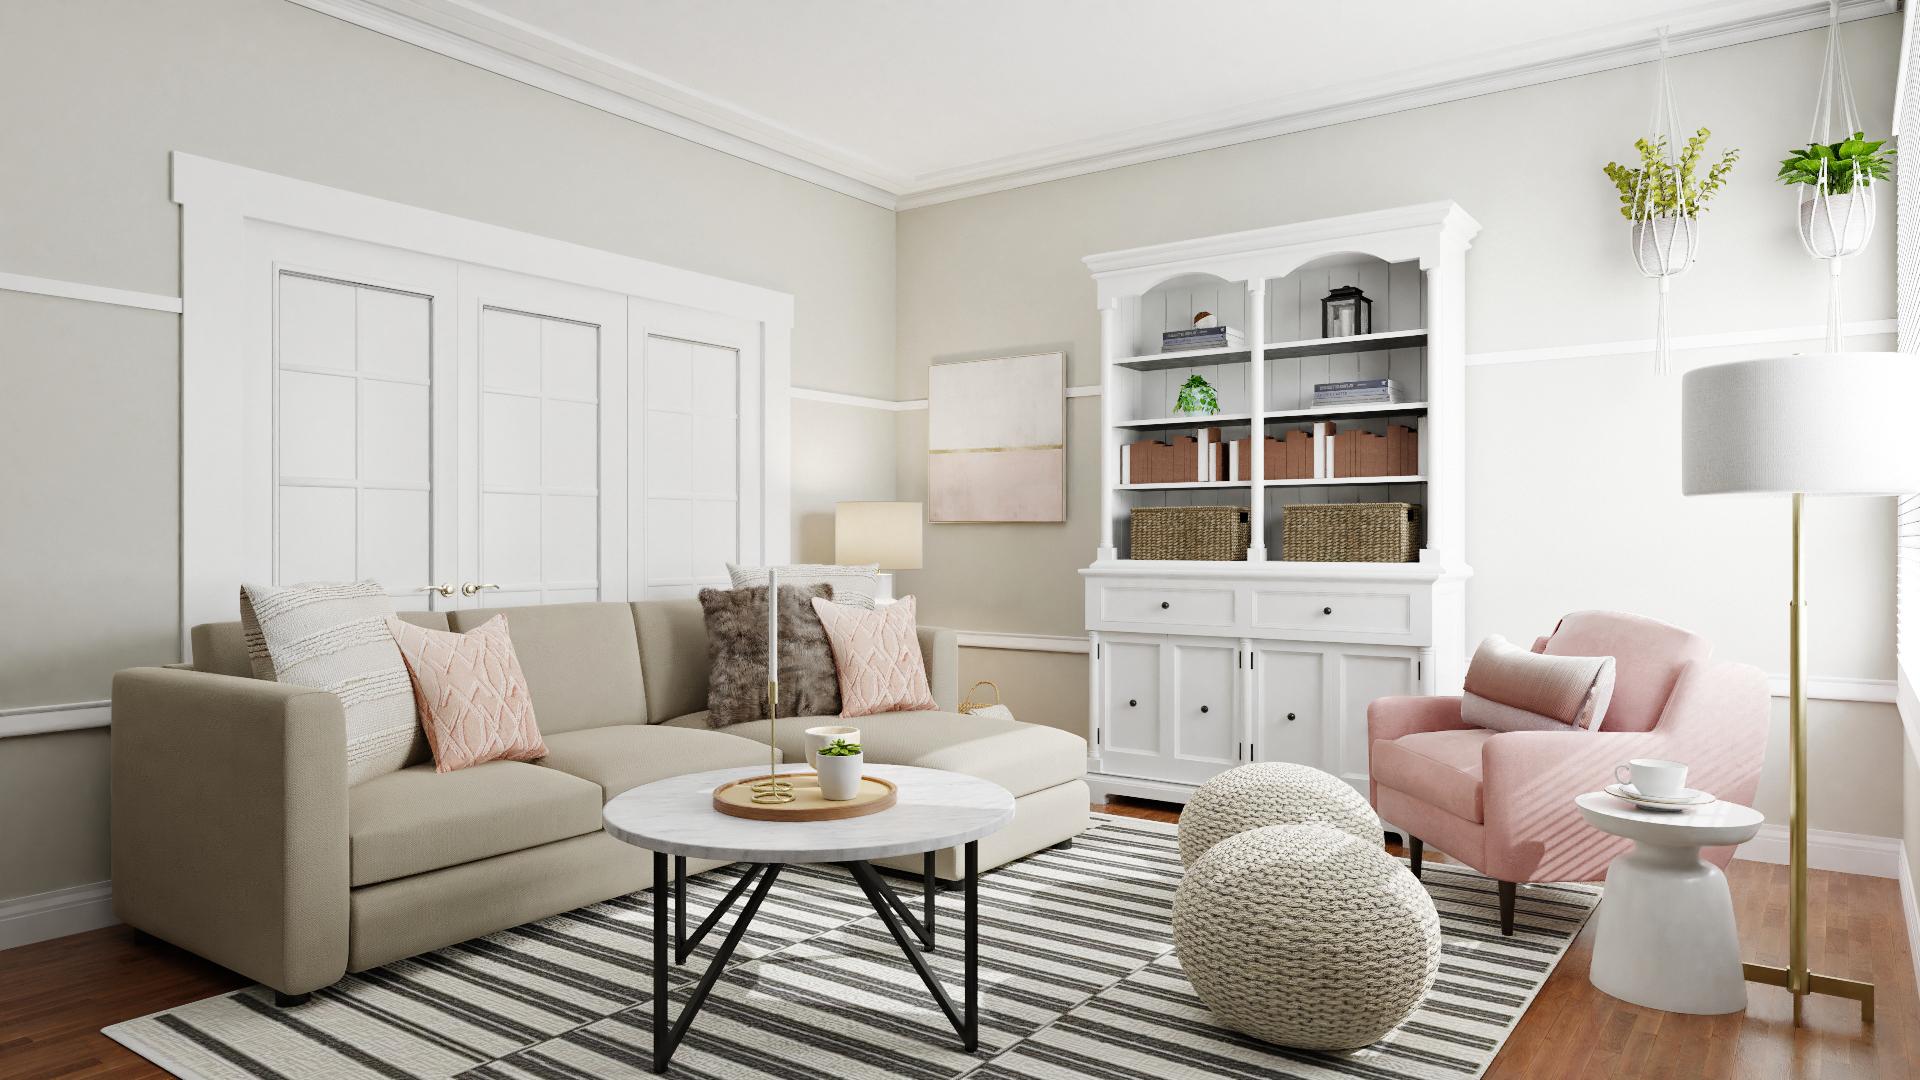 Blush Over This Mid-Century-Inspired Living Room